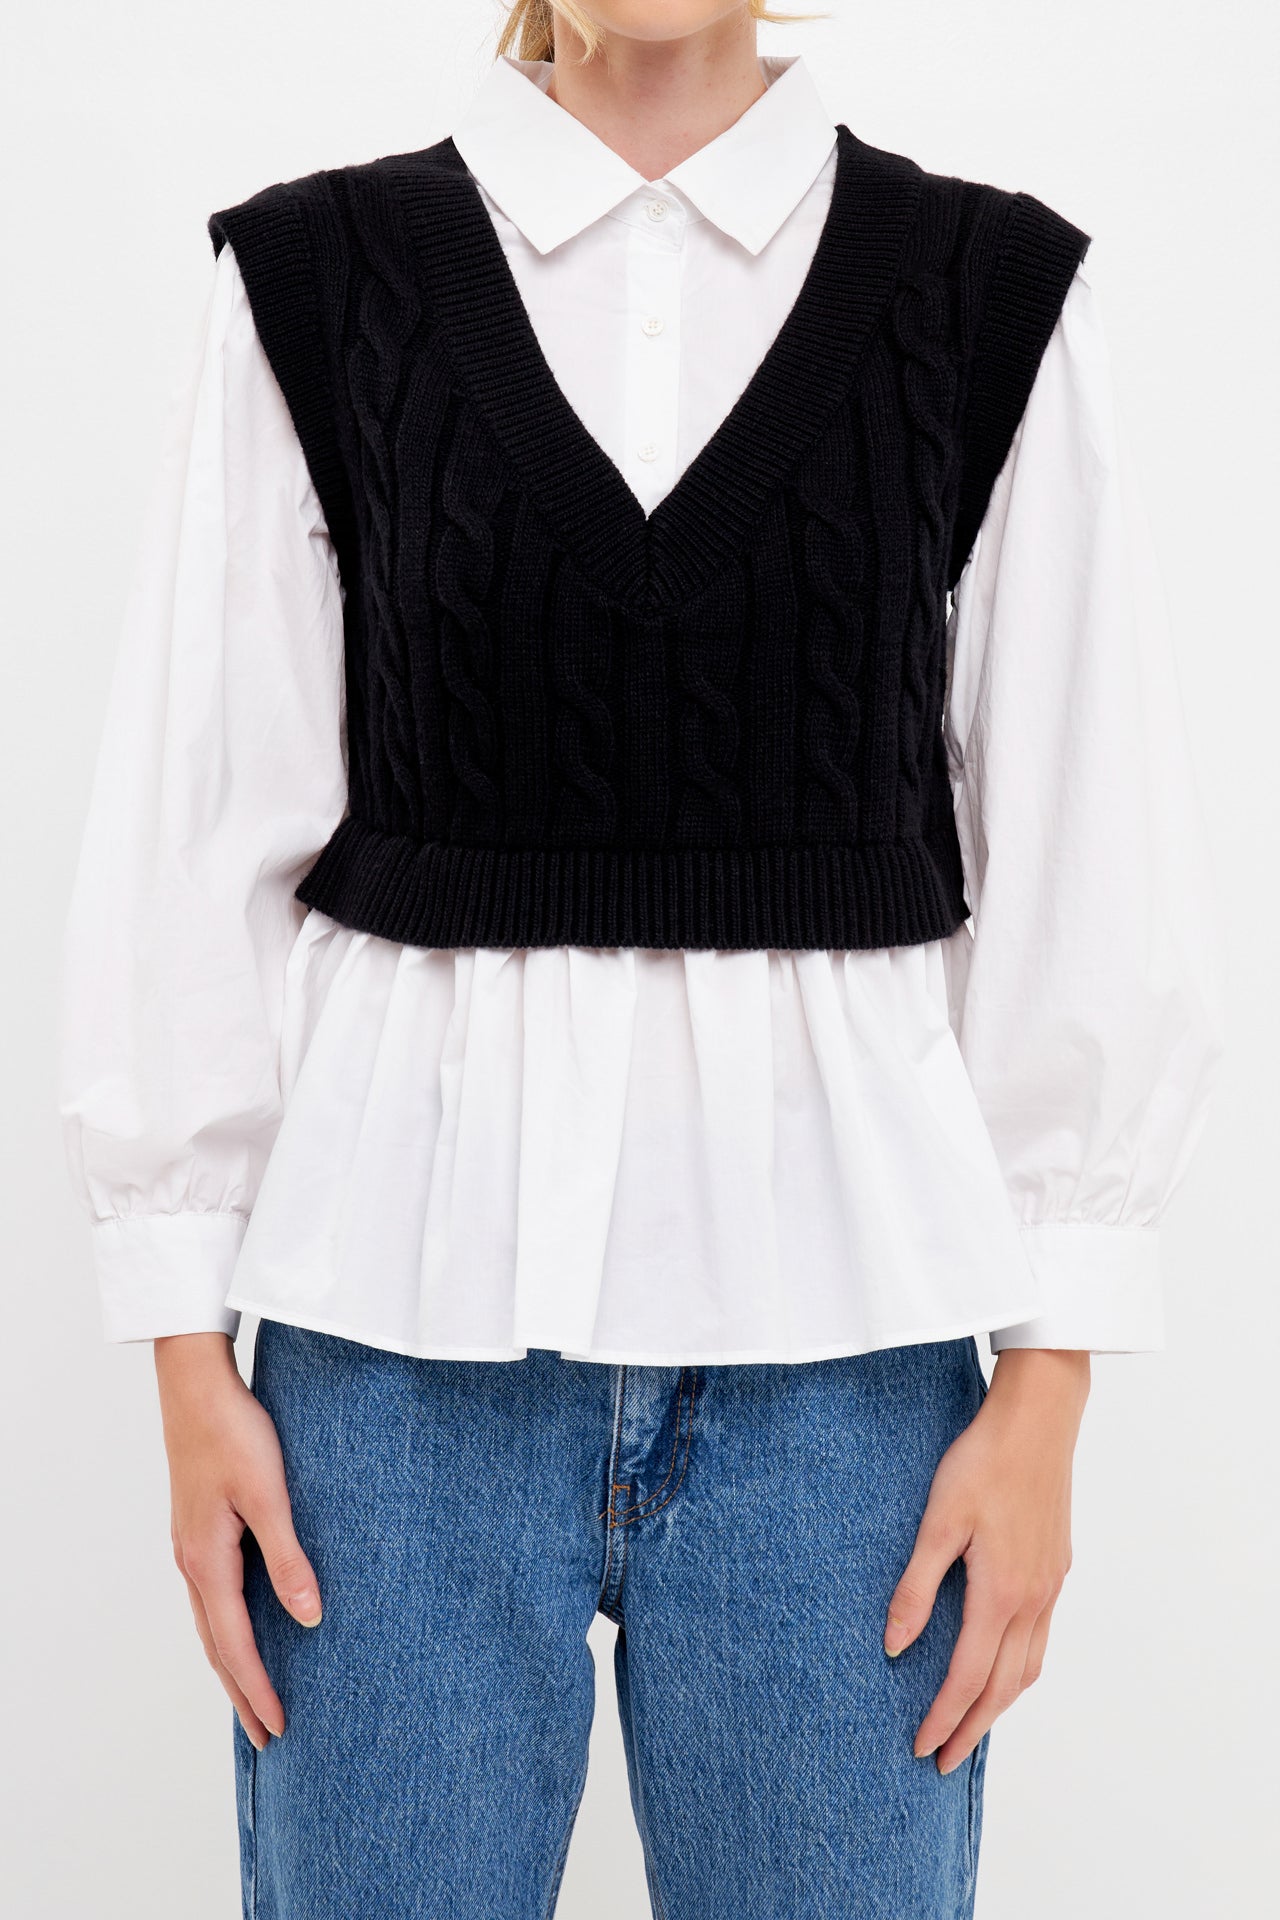 ENGLISH FACTORY - Mixed Media Sweater Vest Top - T-SHIRTS available at Objectrare